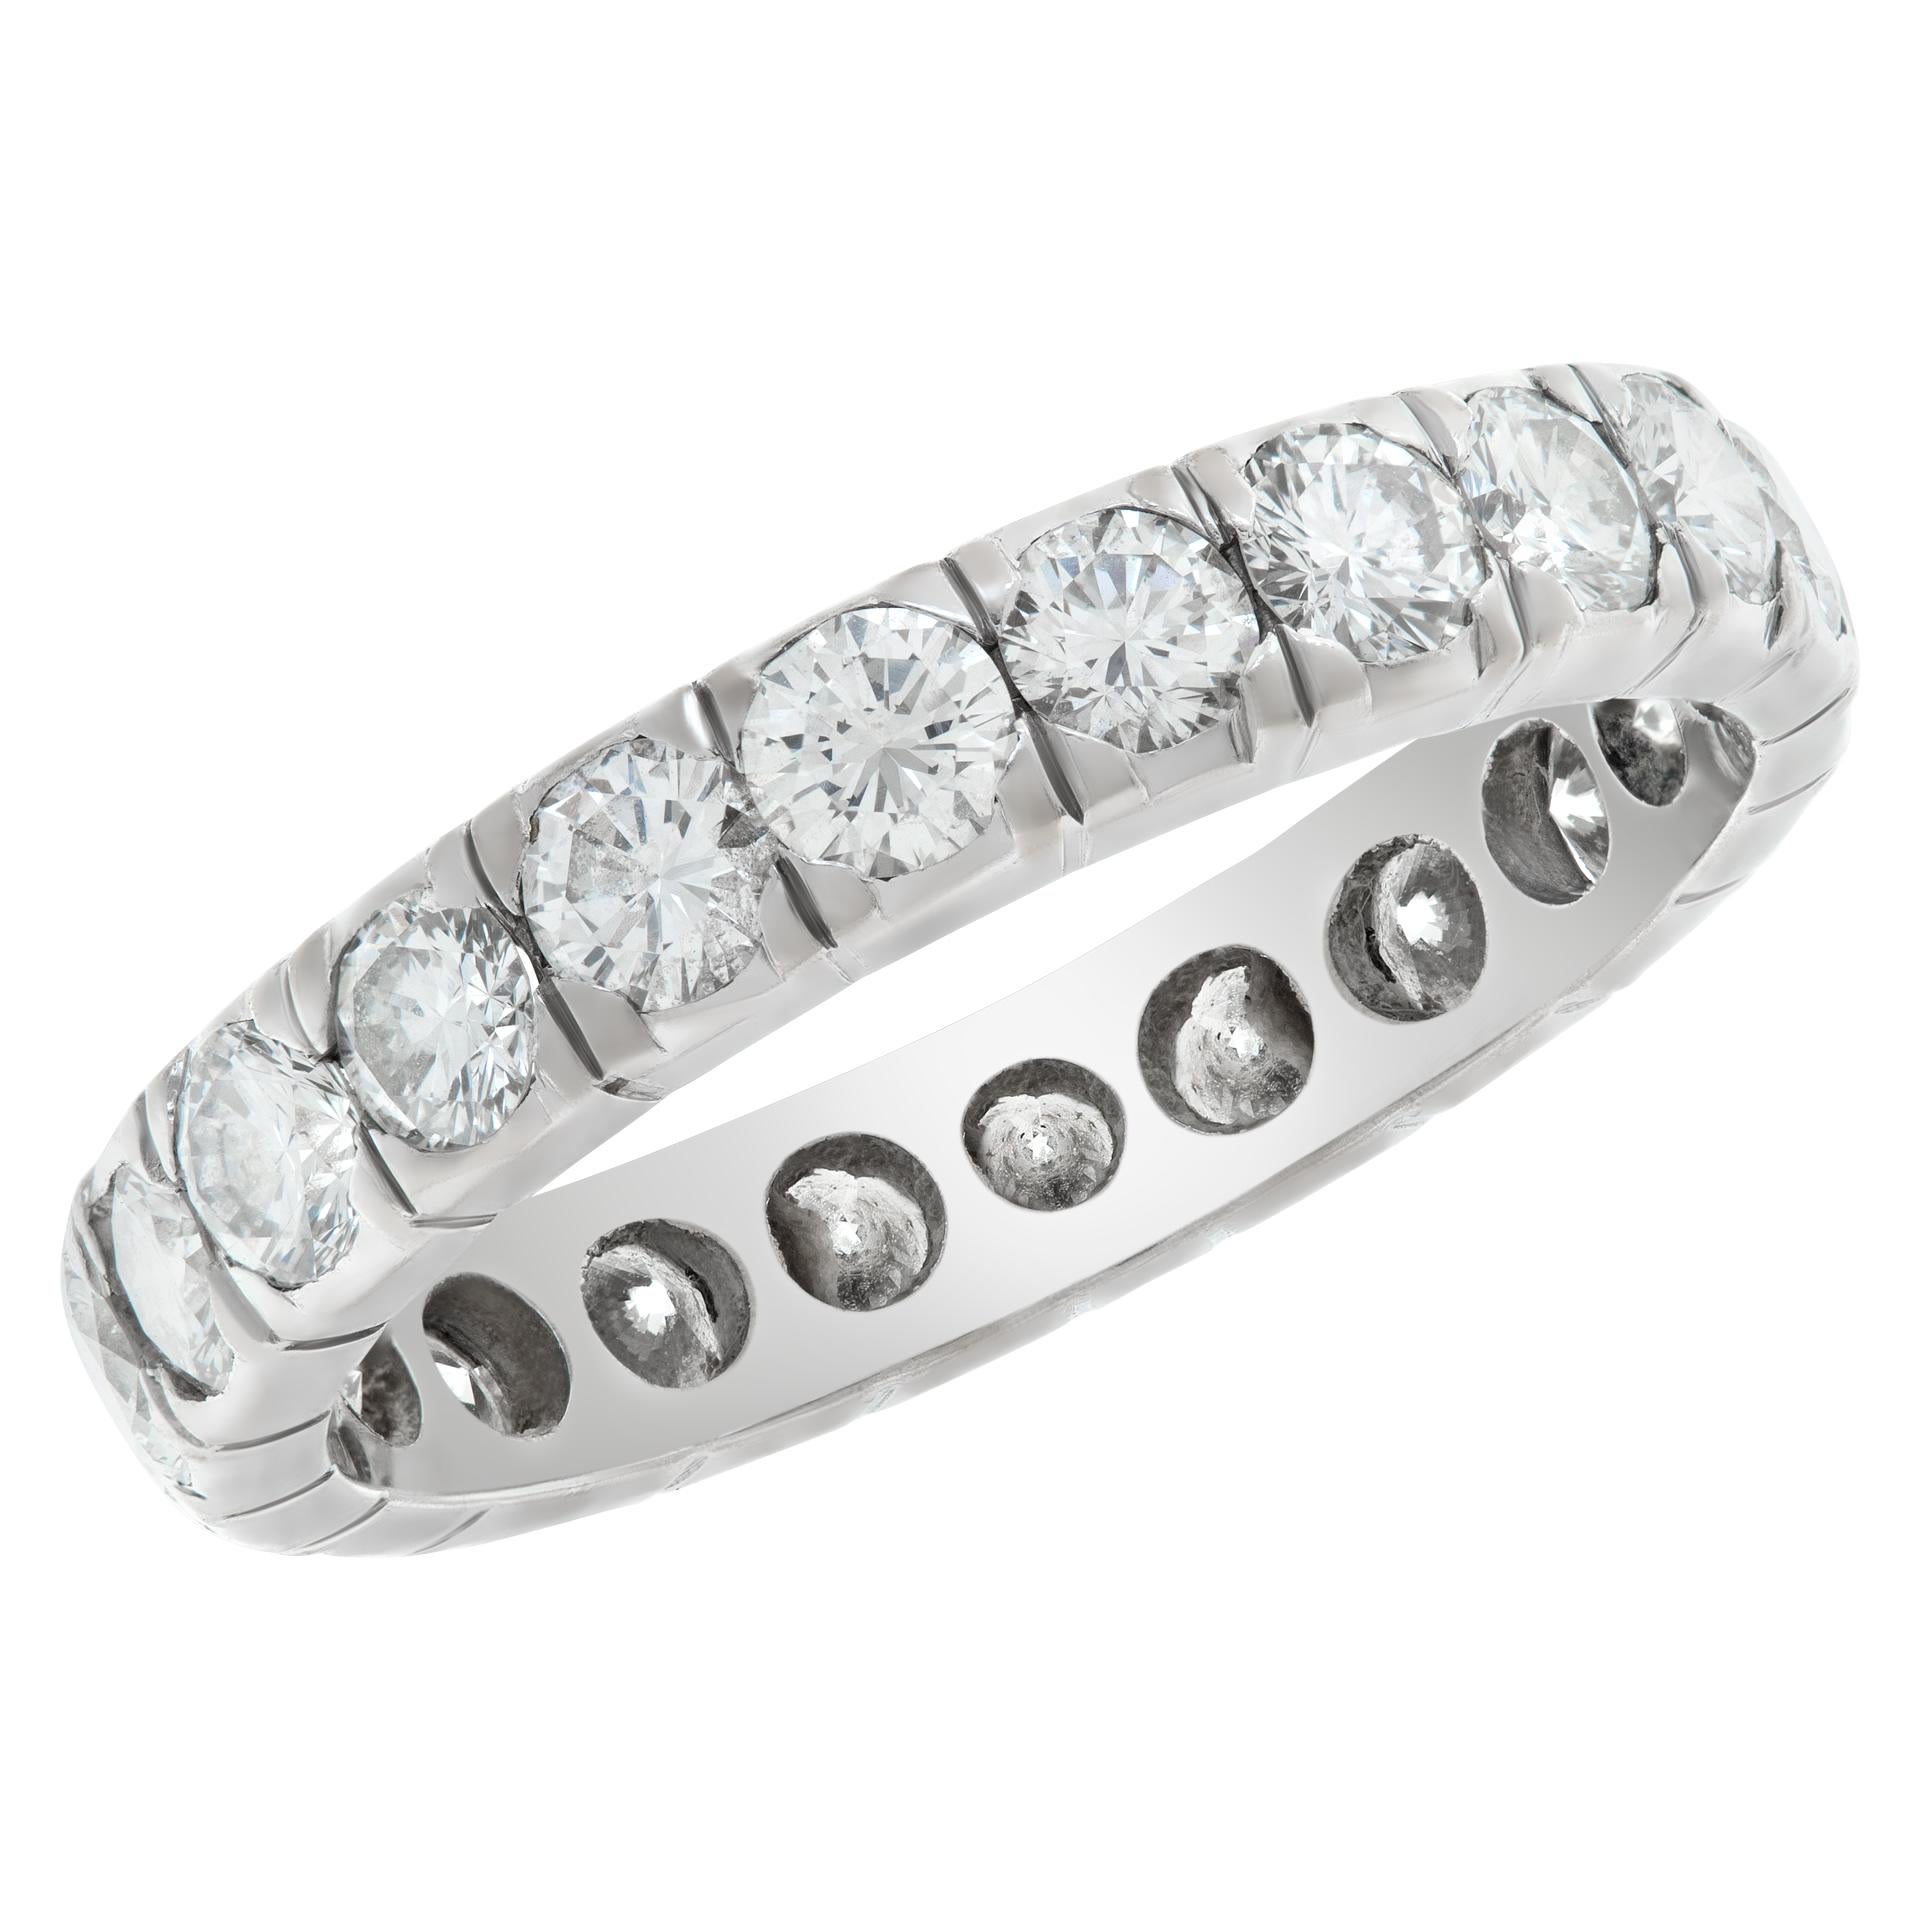 White gold eternity band w/ approx. 1.5 cts in G-H Color, VS Clarity diamonds In Excellent Condition For Sale In Surfside, FL